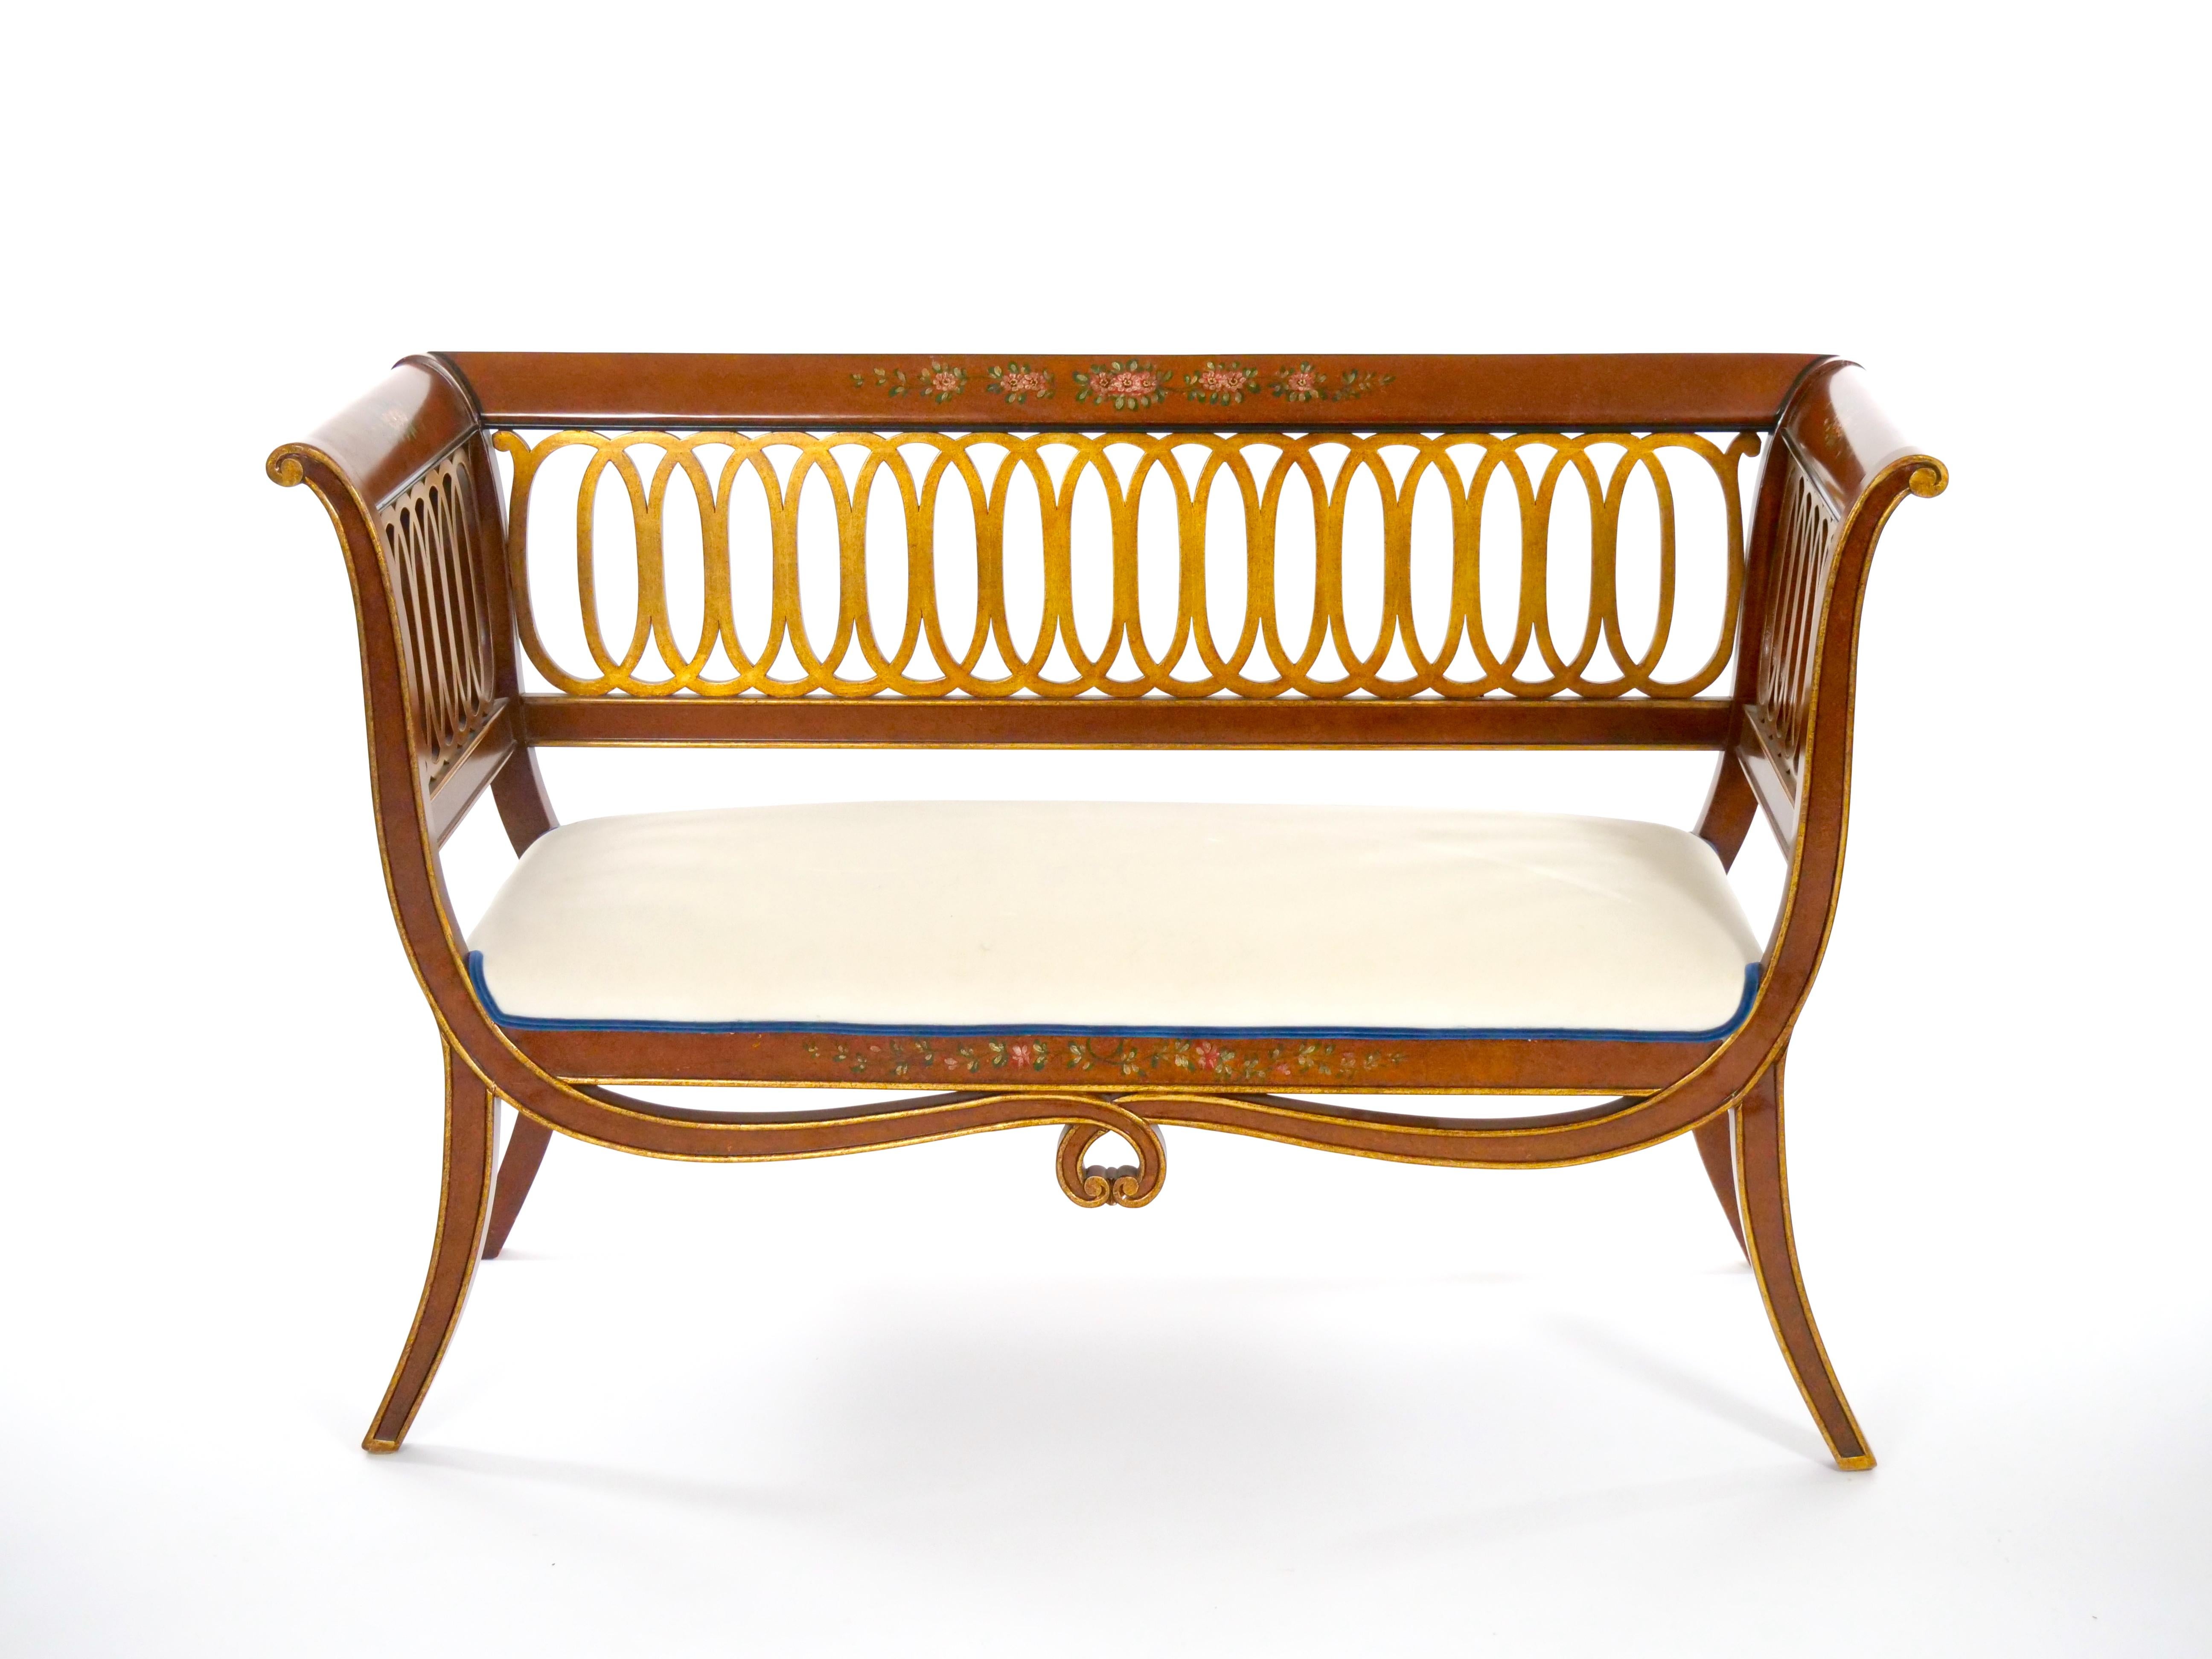 Hand-Painted & Partially Gilt Adams Style Small Settee For Sale 10